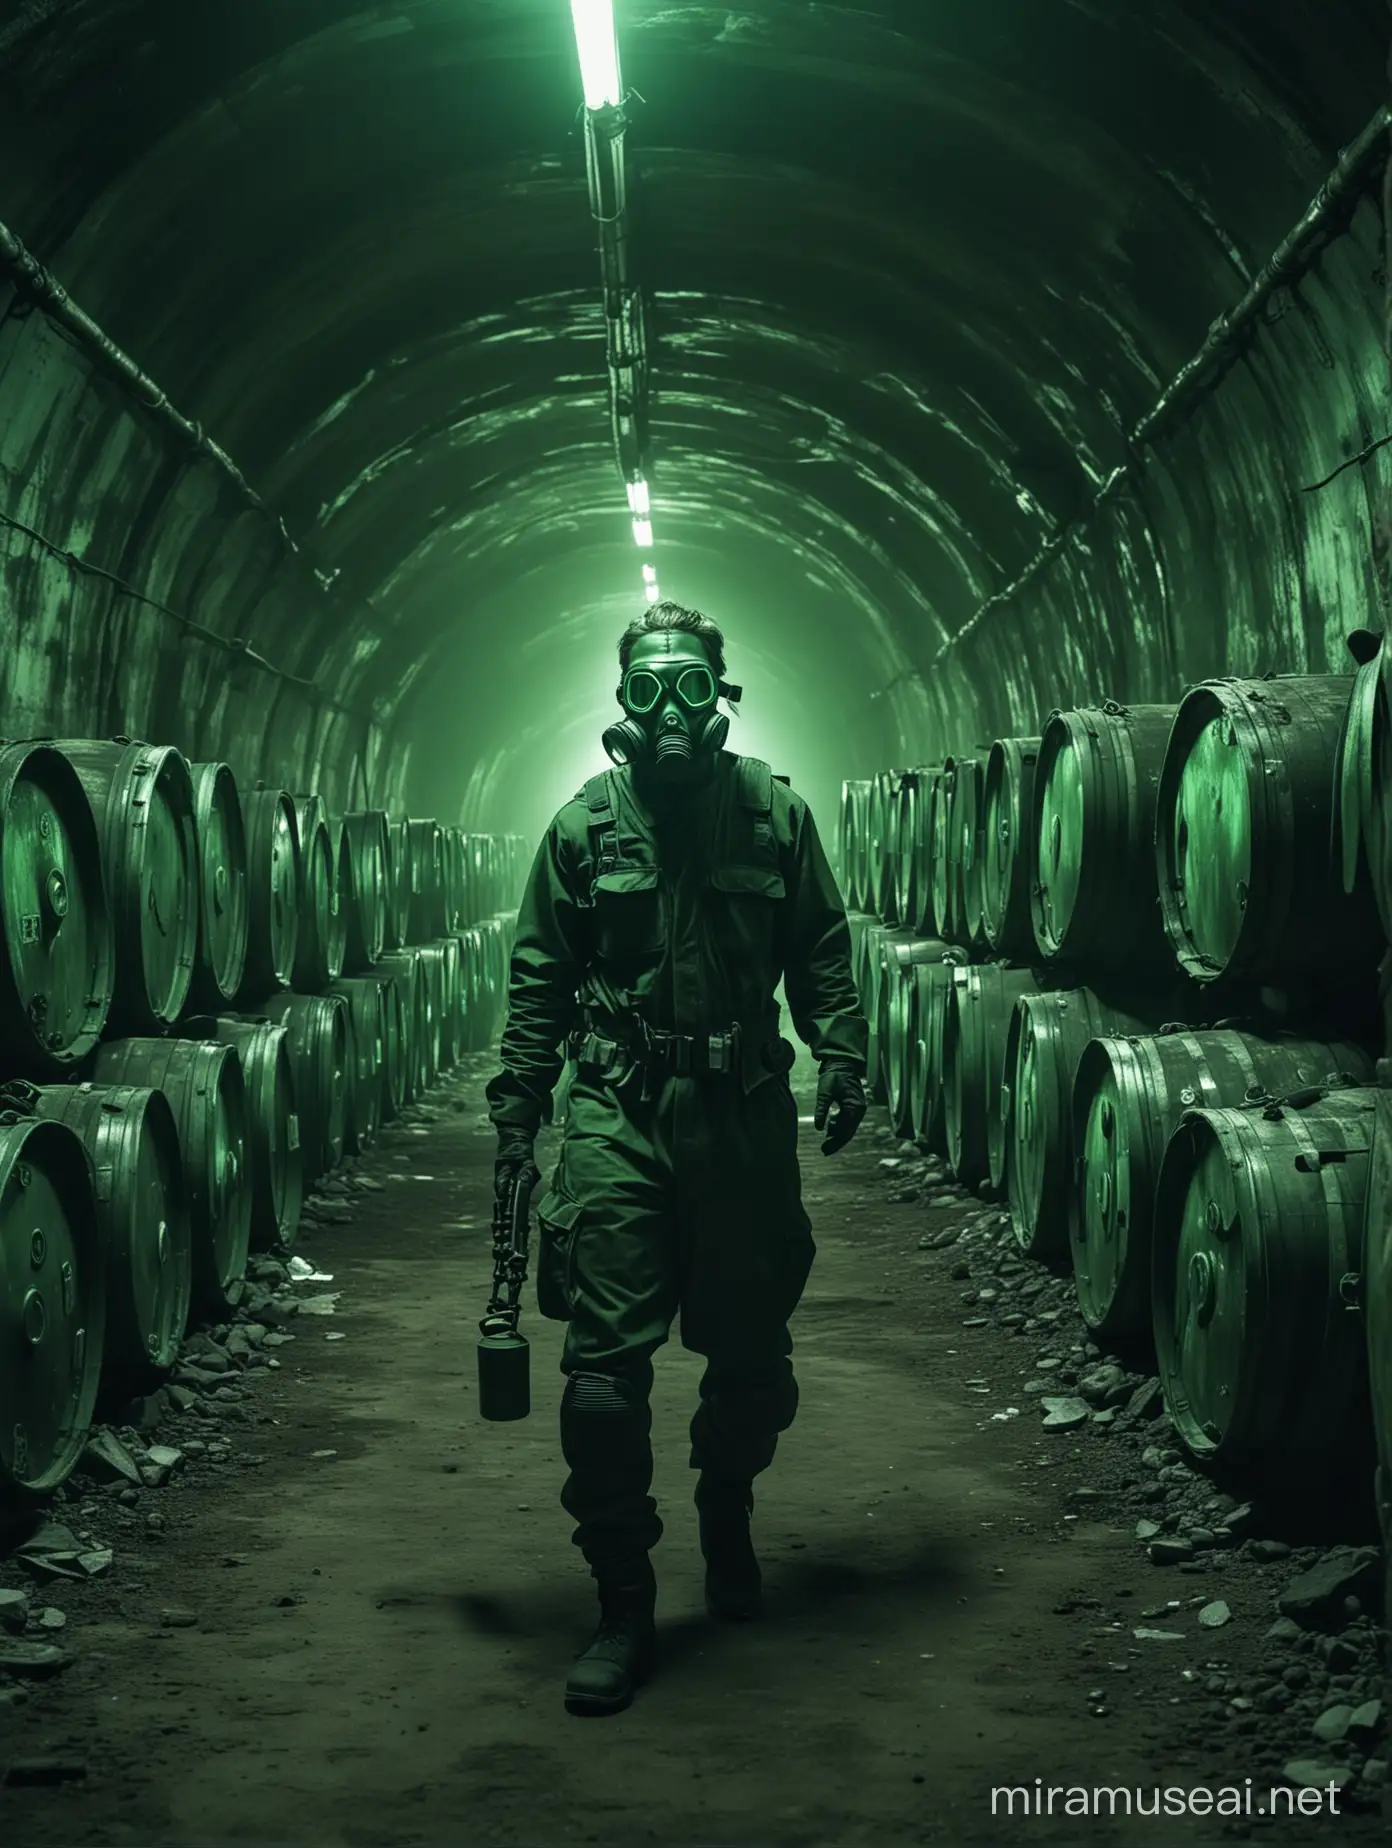 Vibrant Green Neon Toxic Background with Gas Mask and Barrels in Futuristic Tunnel